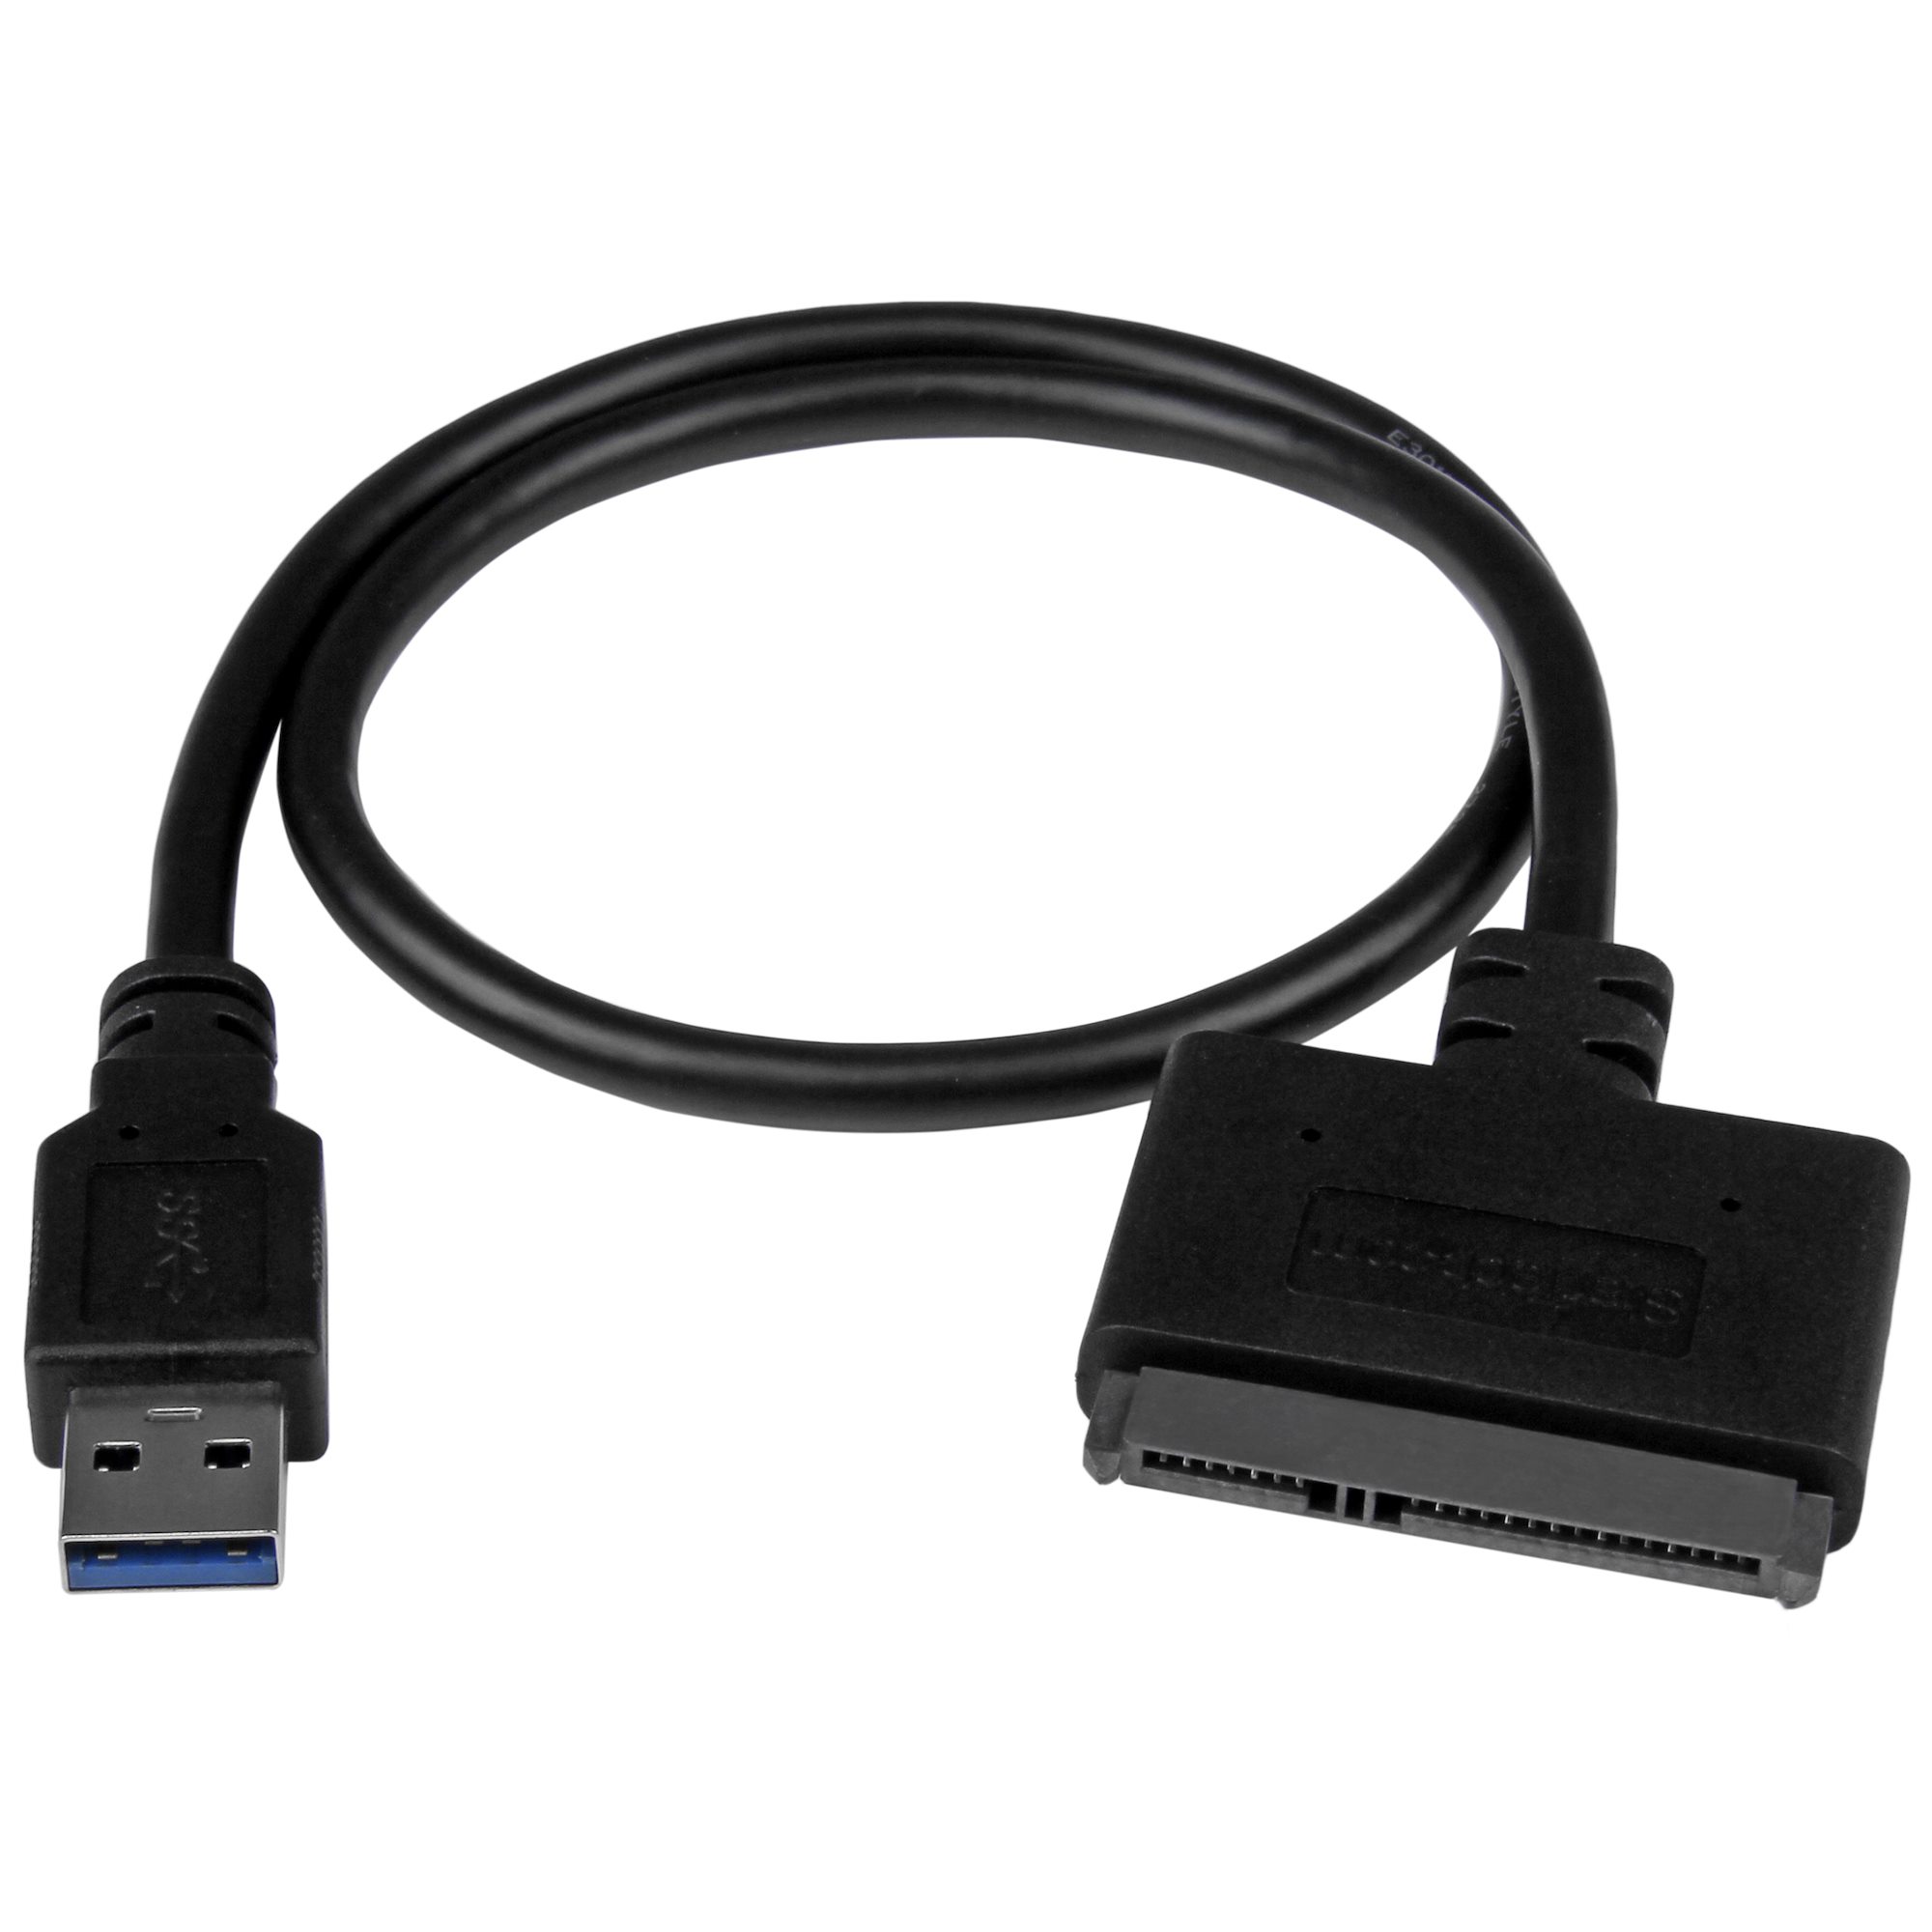 Black USB 3.0 SATA 7 15pin to USB 2.0 Cable for Portable HDD 2.5 HDD Mode 1X 